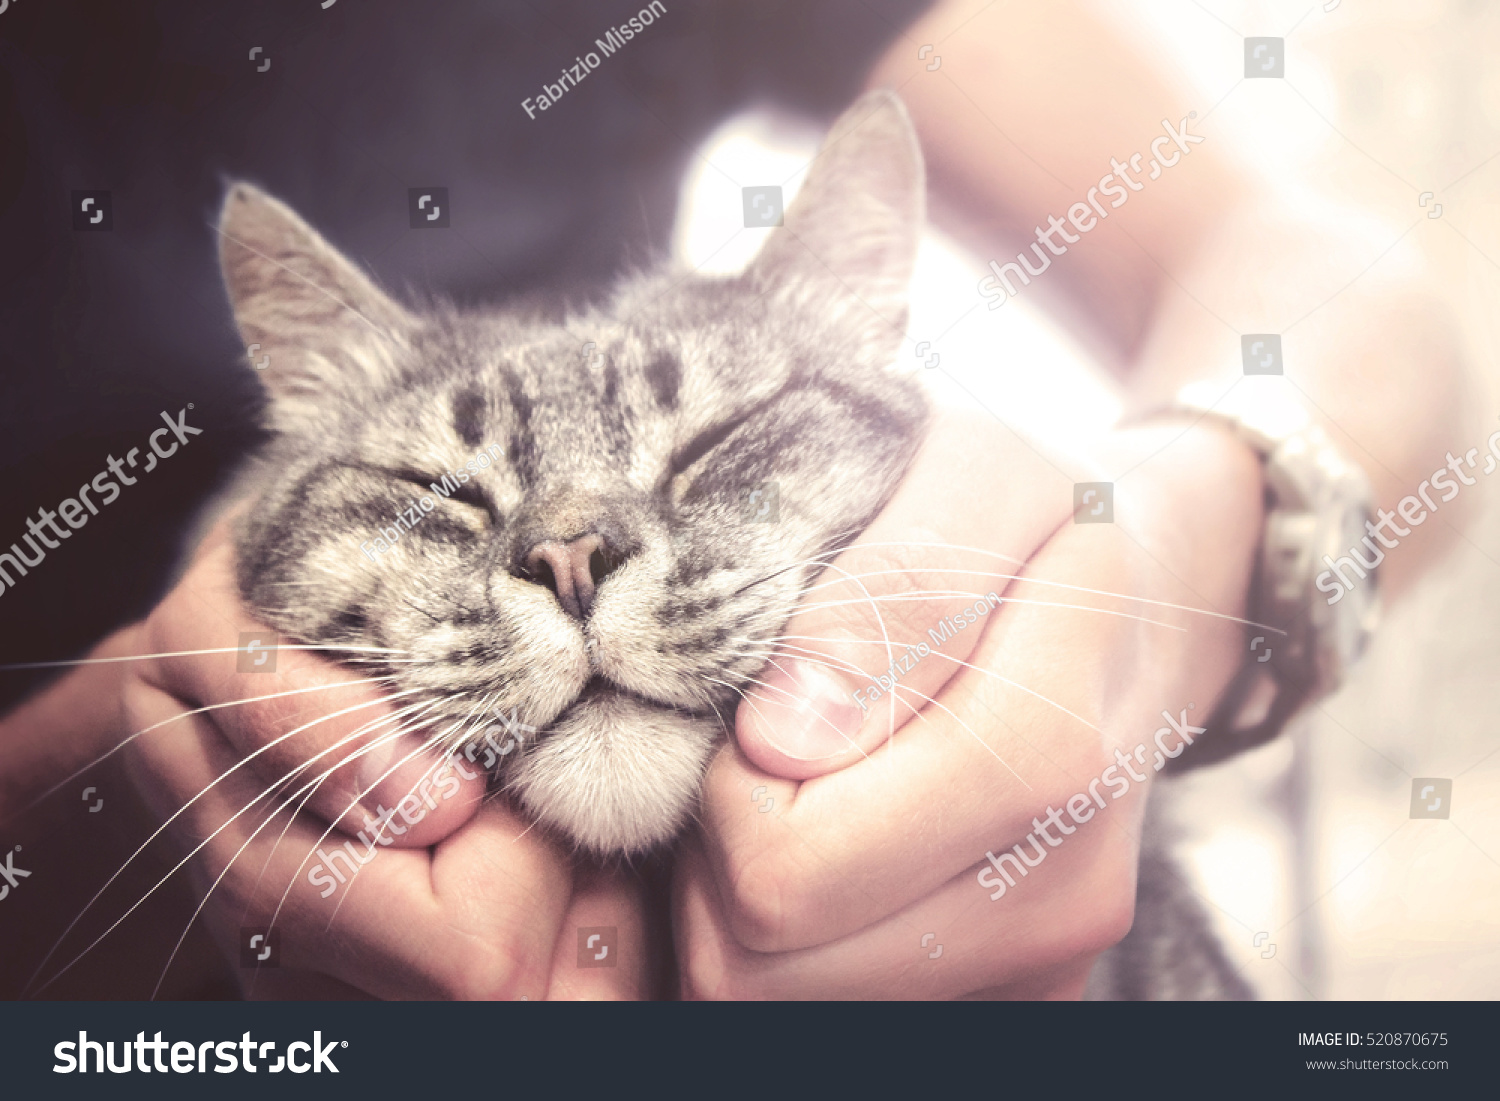 lovely cat in human hands, vintage effect love for the animals #520870675